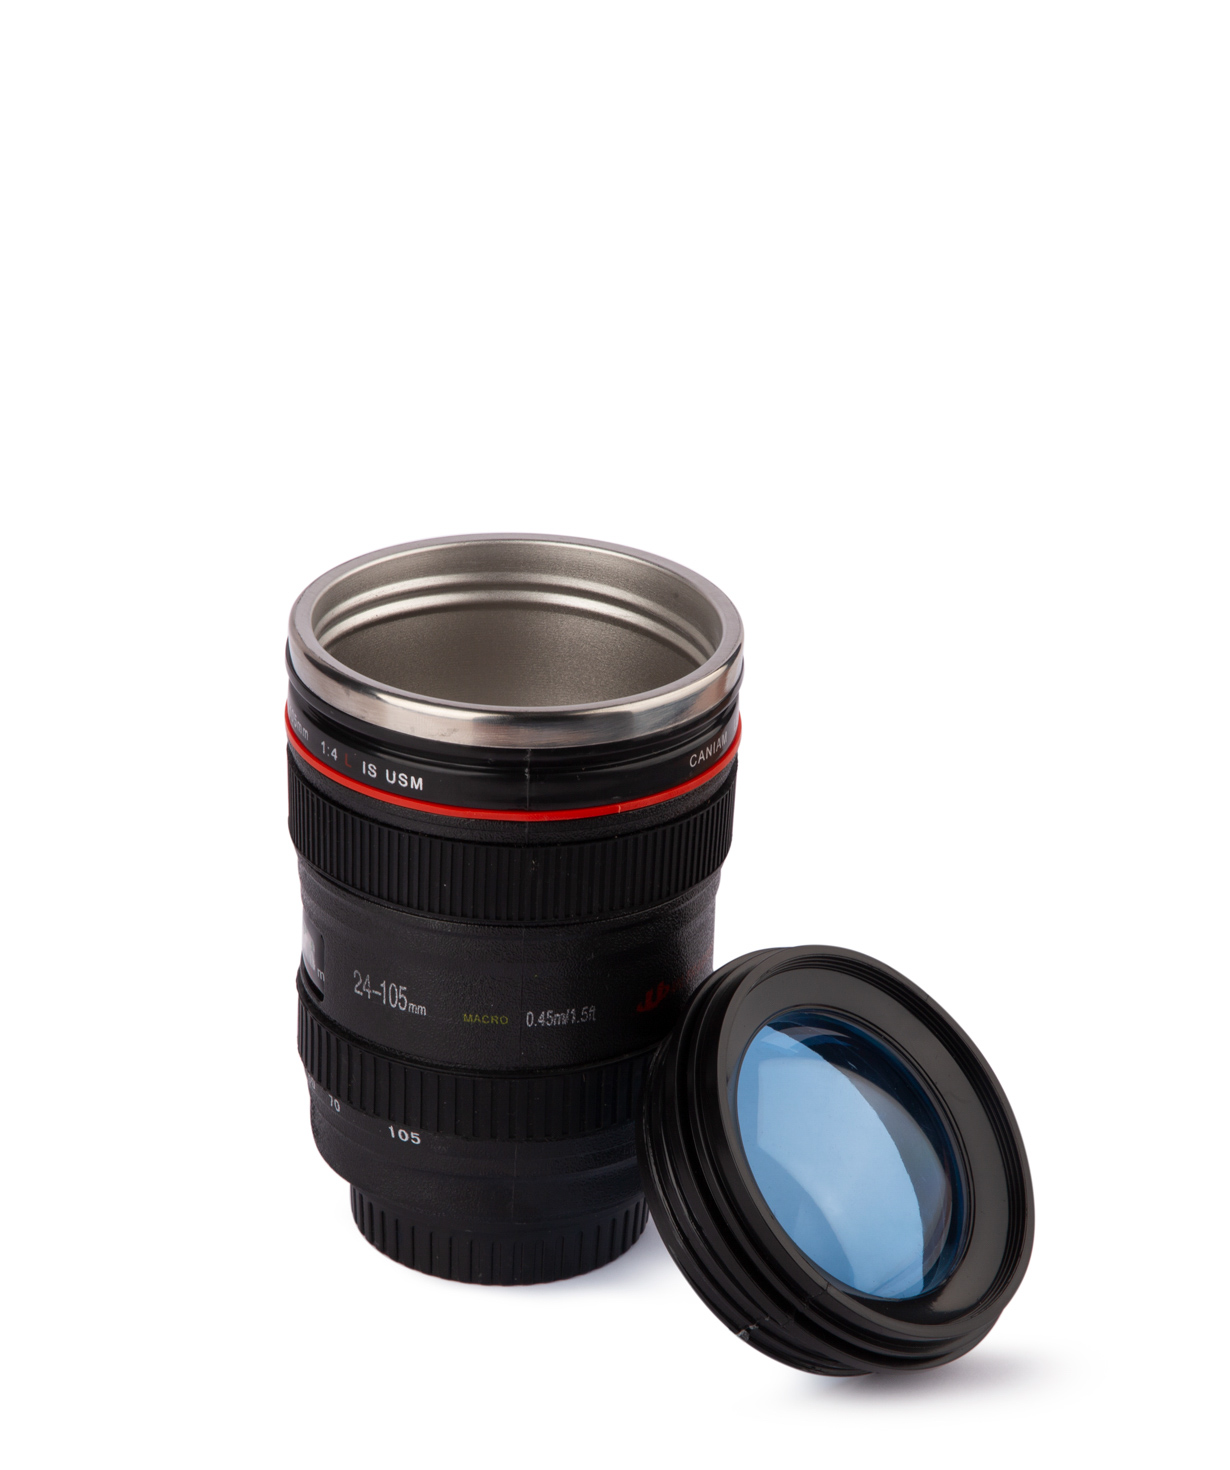 Cup «Creative Gifts» camera lens, black